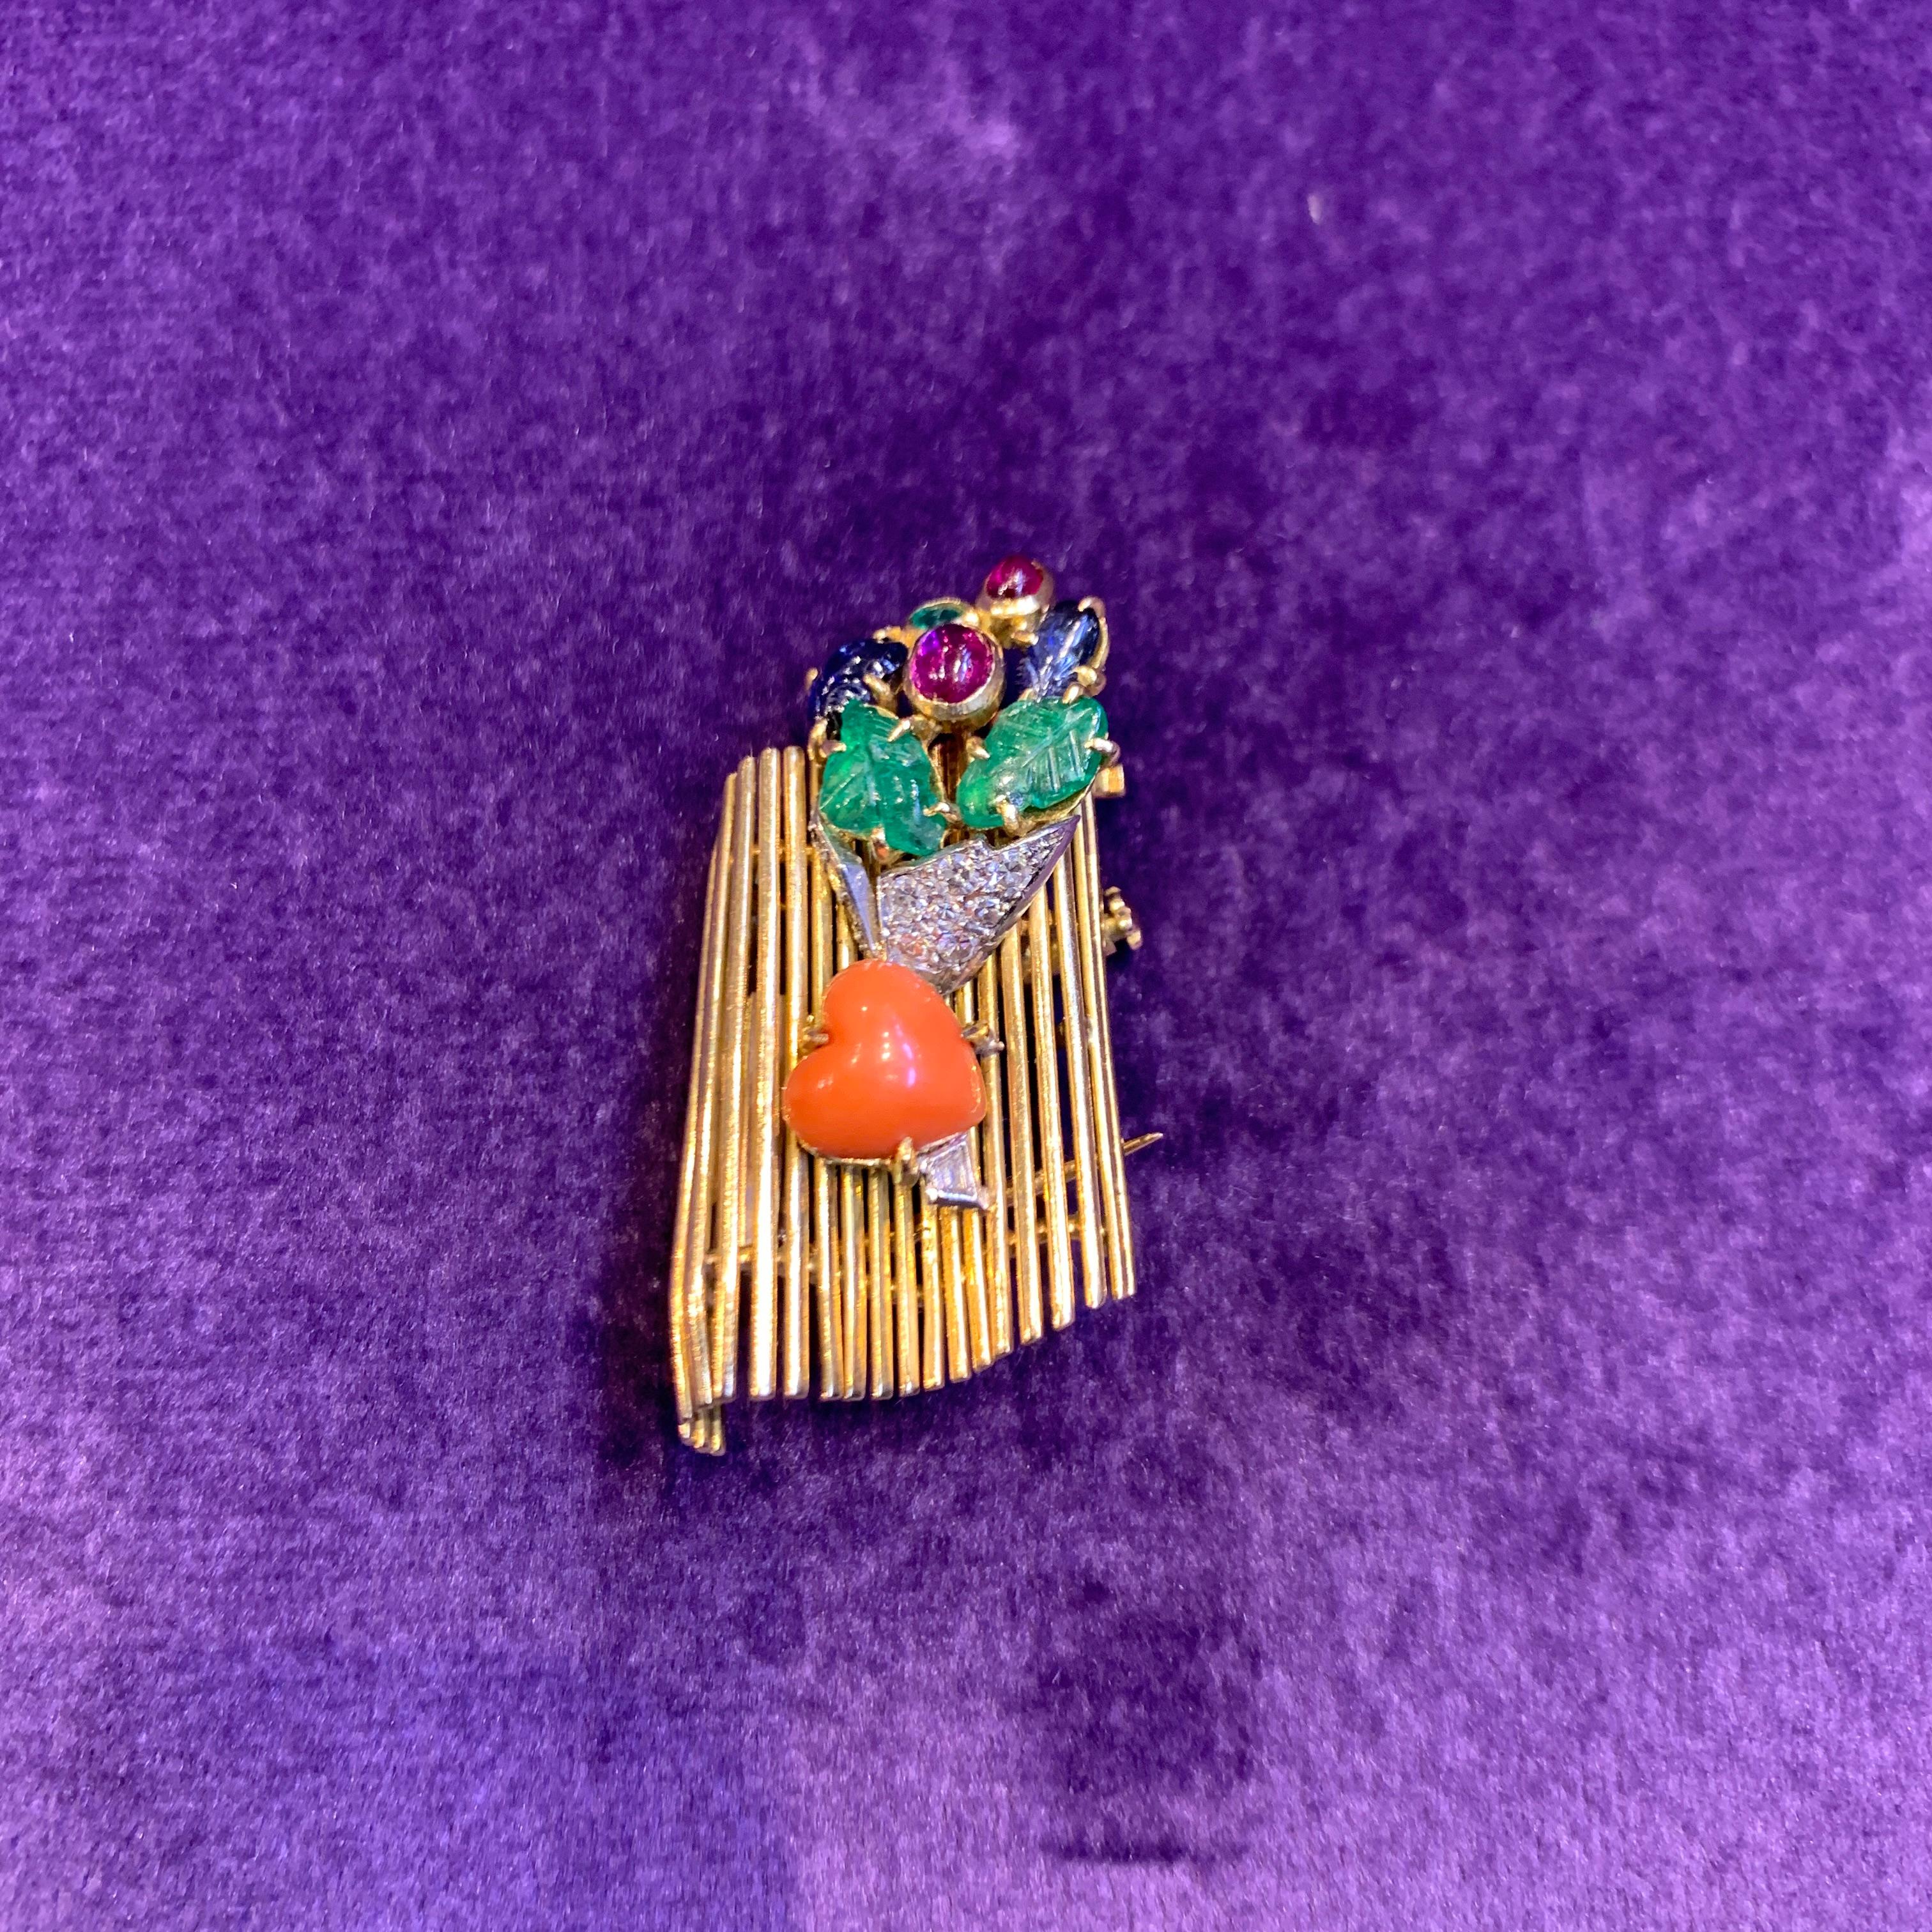 Iconic Cartier Tutti Frutti Lovers Bench Brooch 1